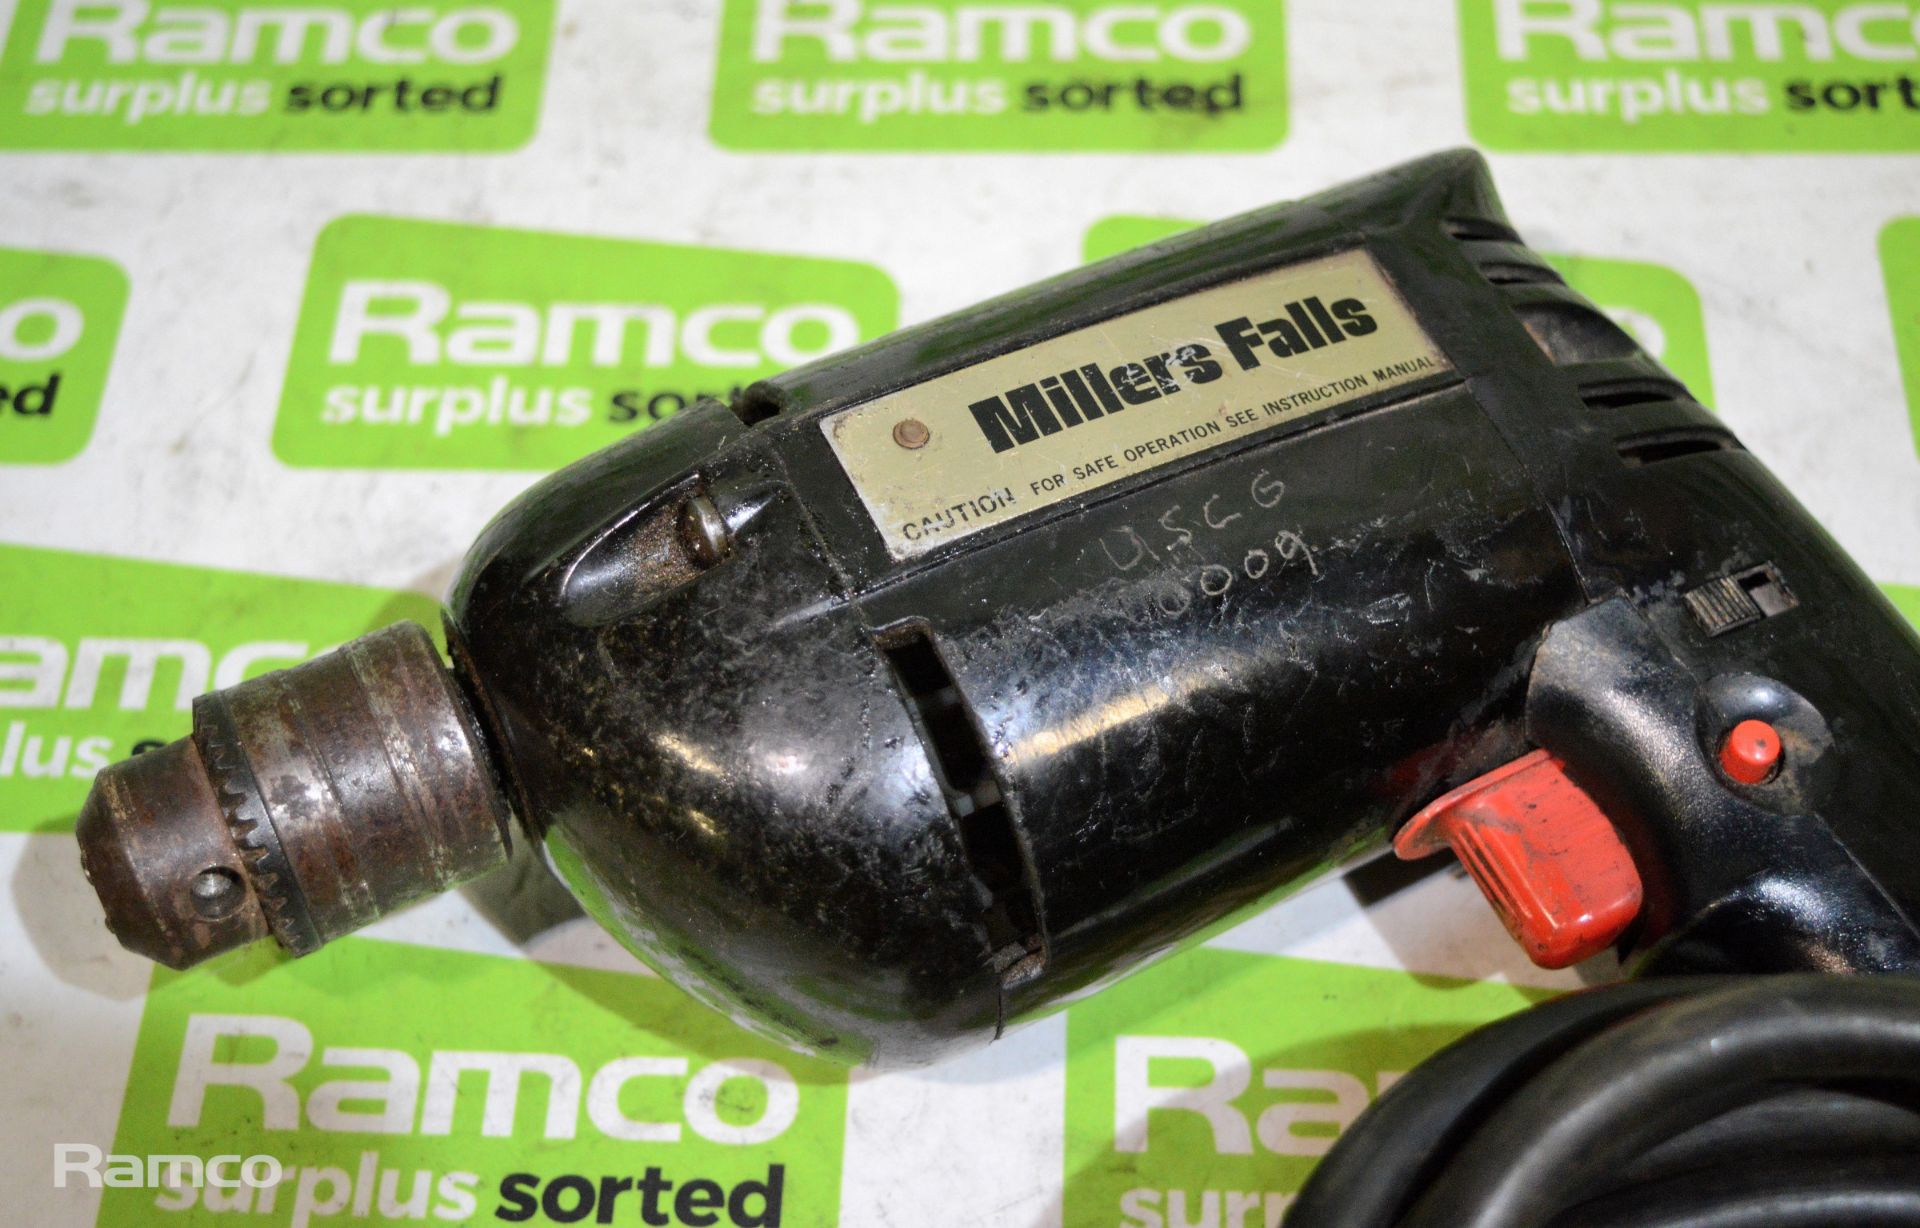 IR millers Fall SP6039A electric port drill, 120v - Image 3 of 3